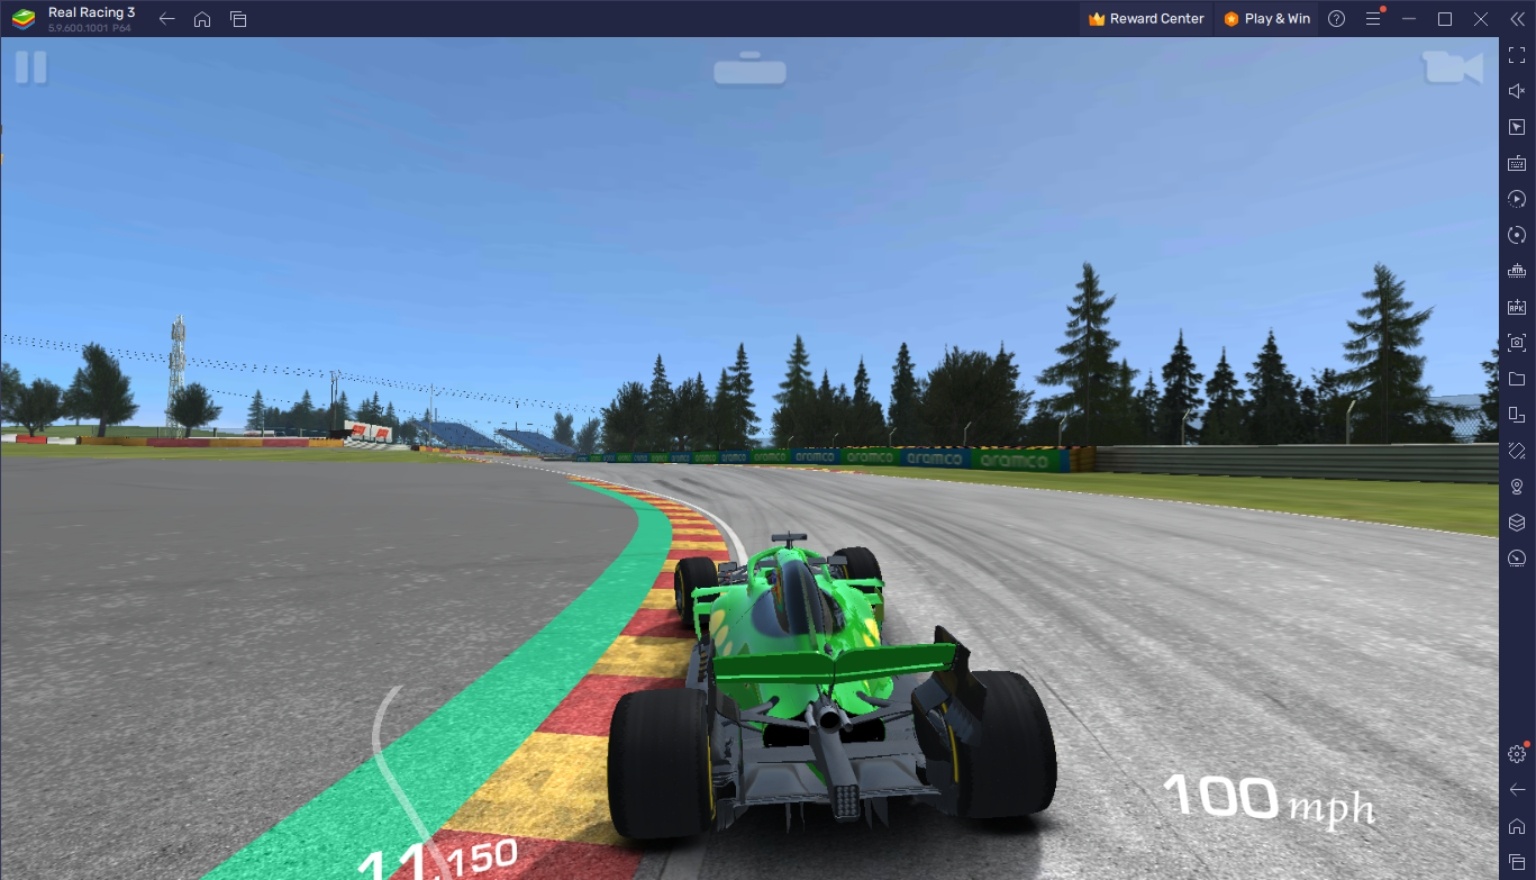 How to Improve Your Driving Skills in Real Racing 3